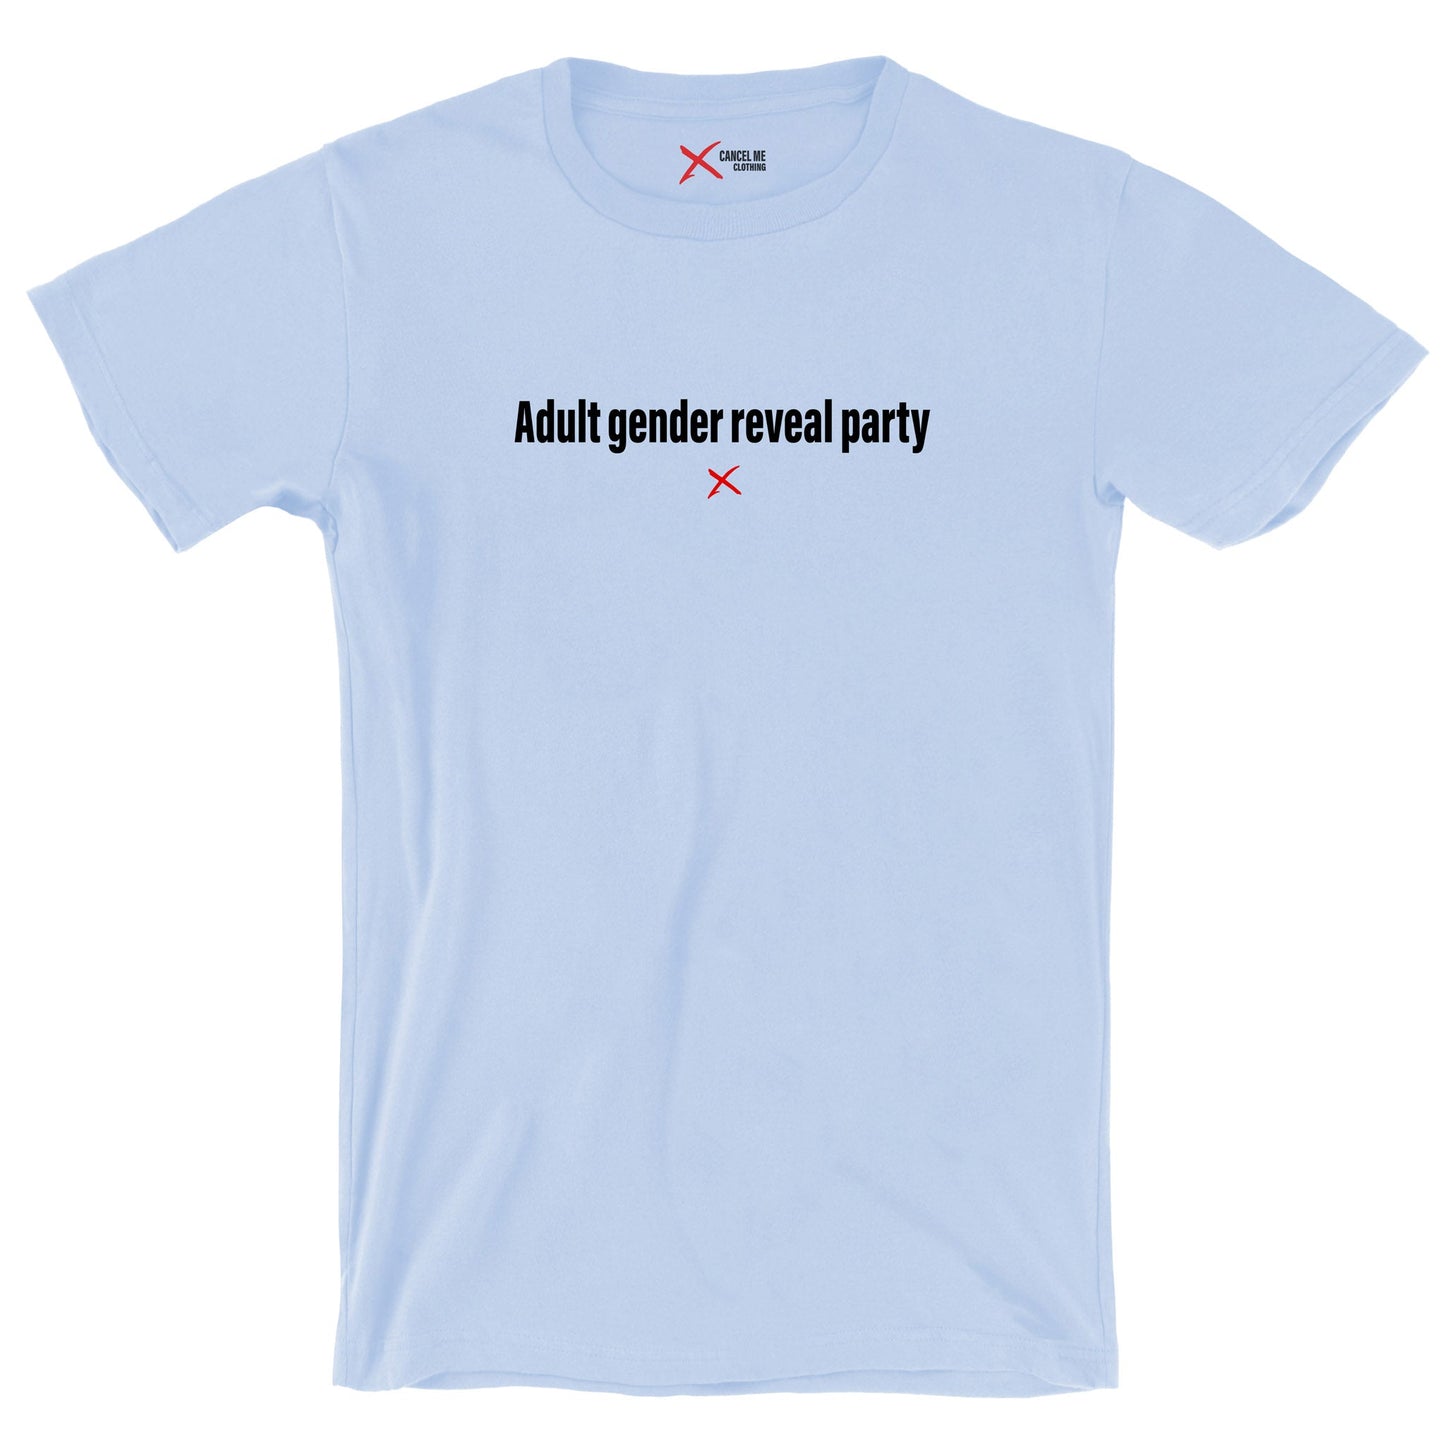 Adult gender reveal party - Shirt